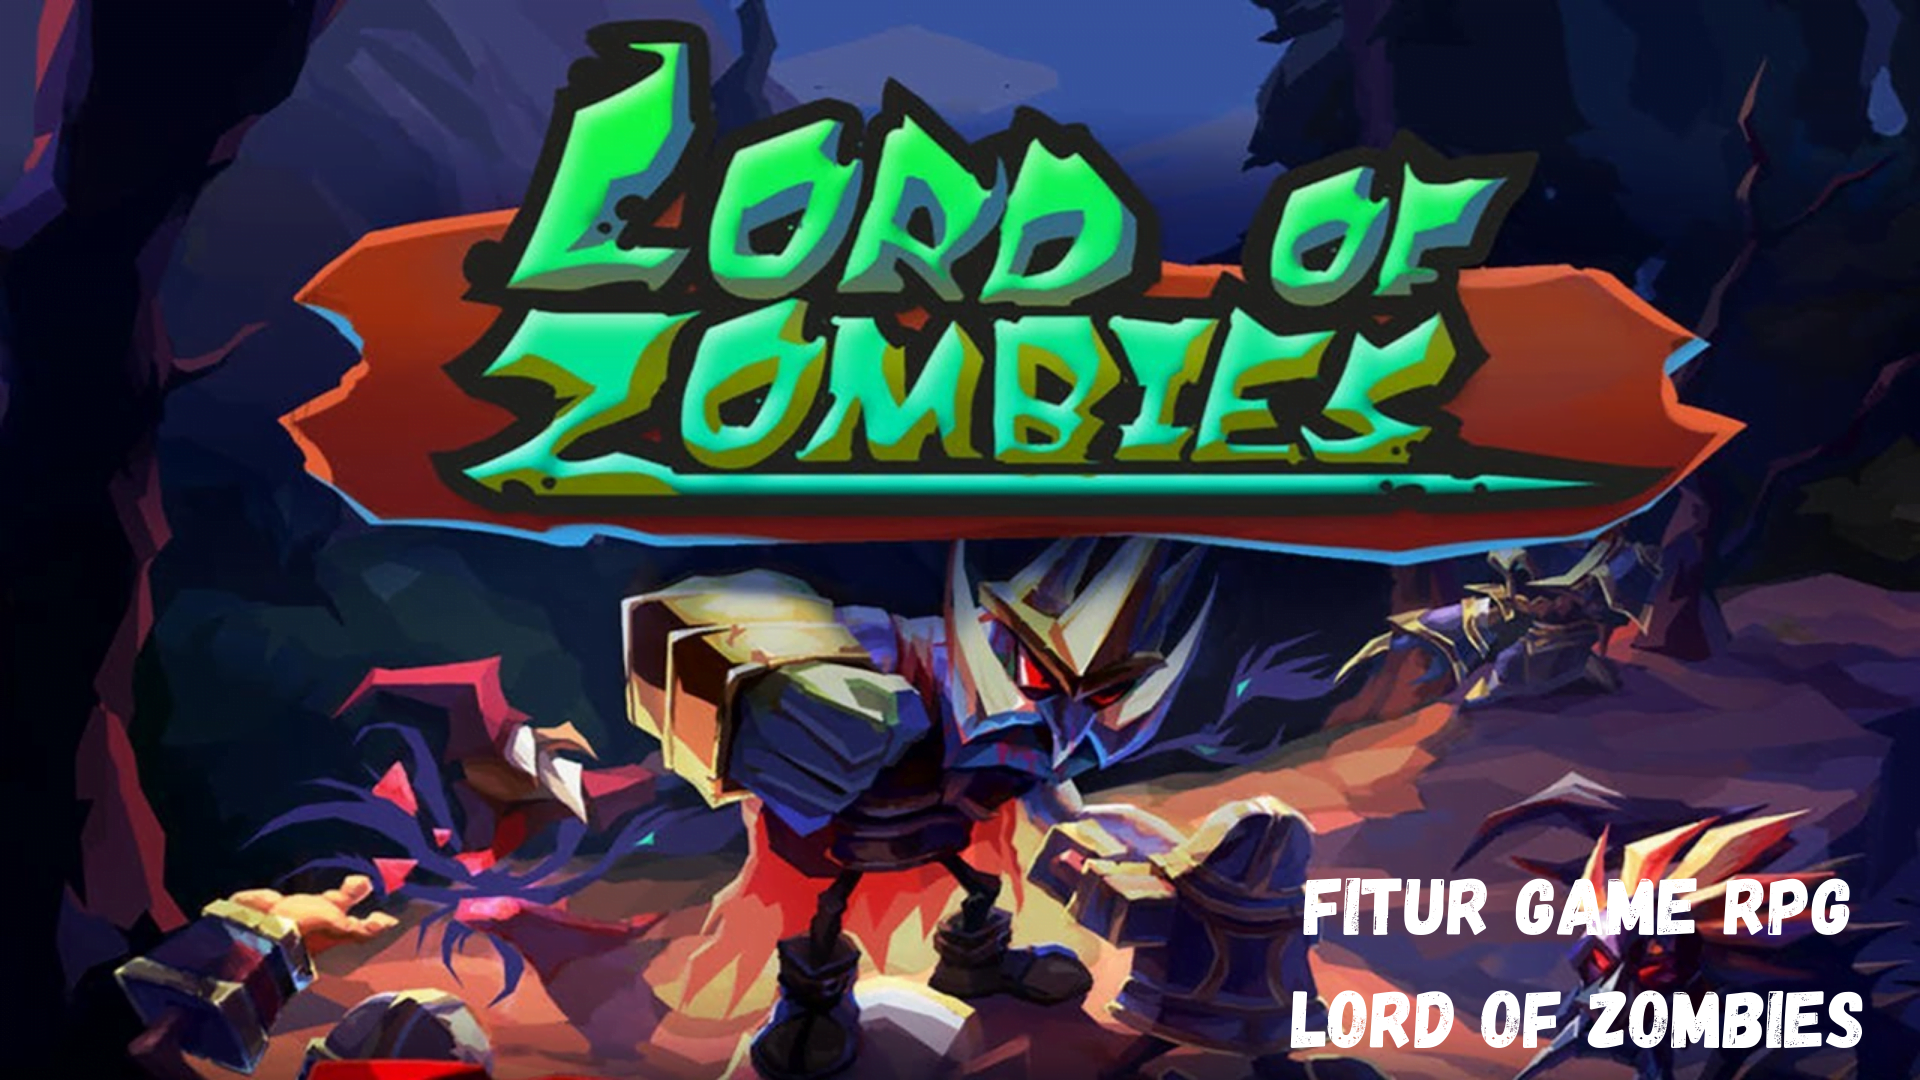 Fitur Game RPG Lord of Zombies